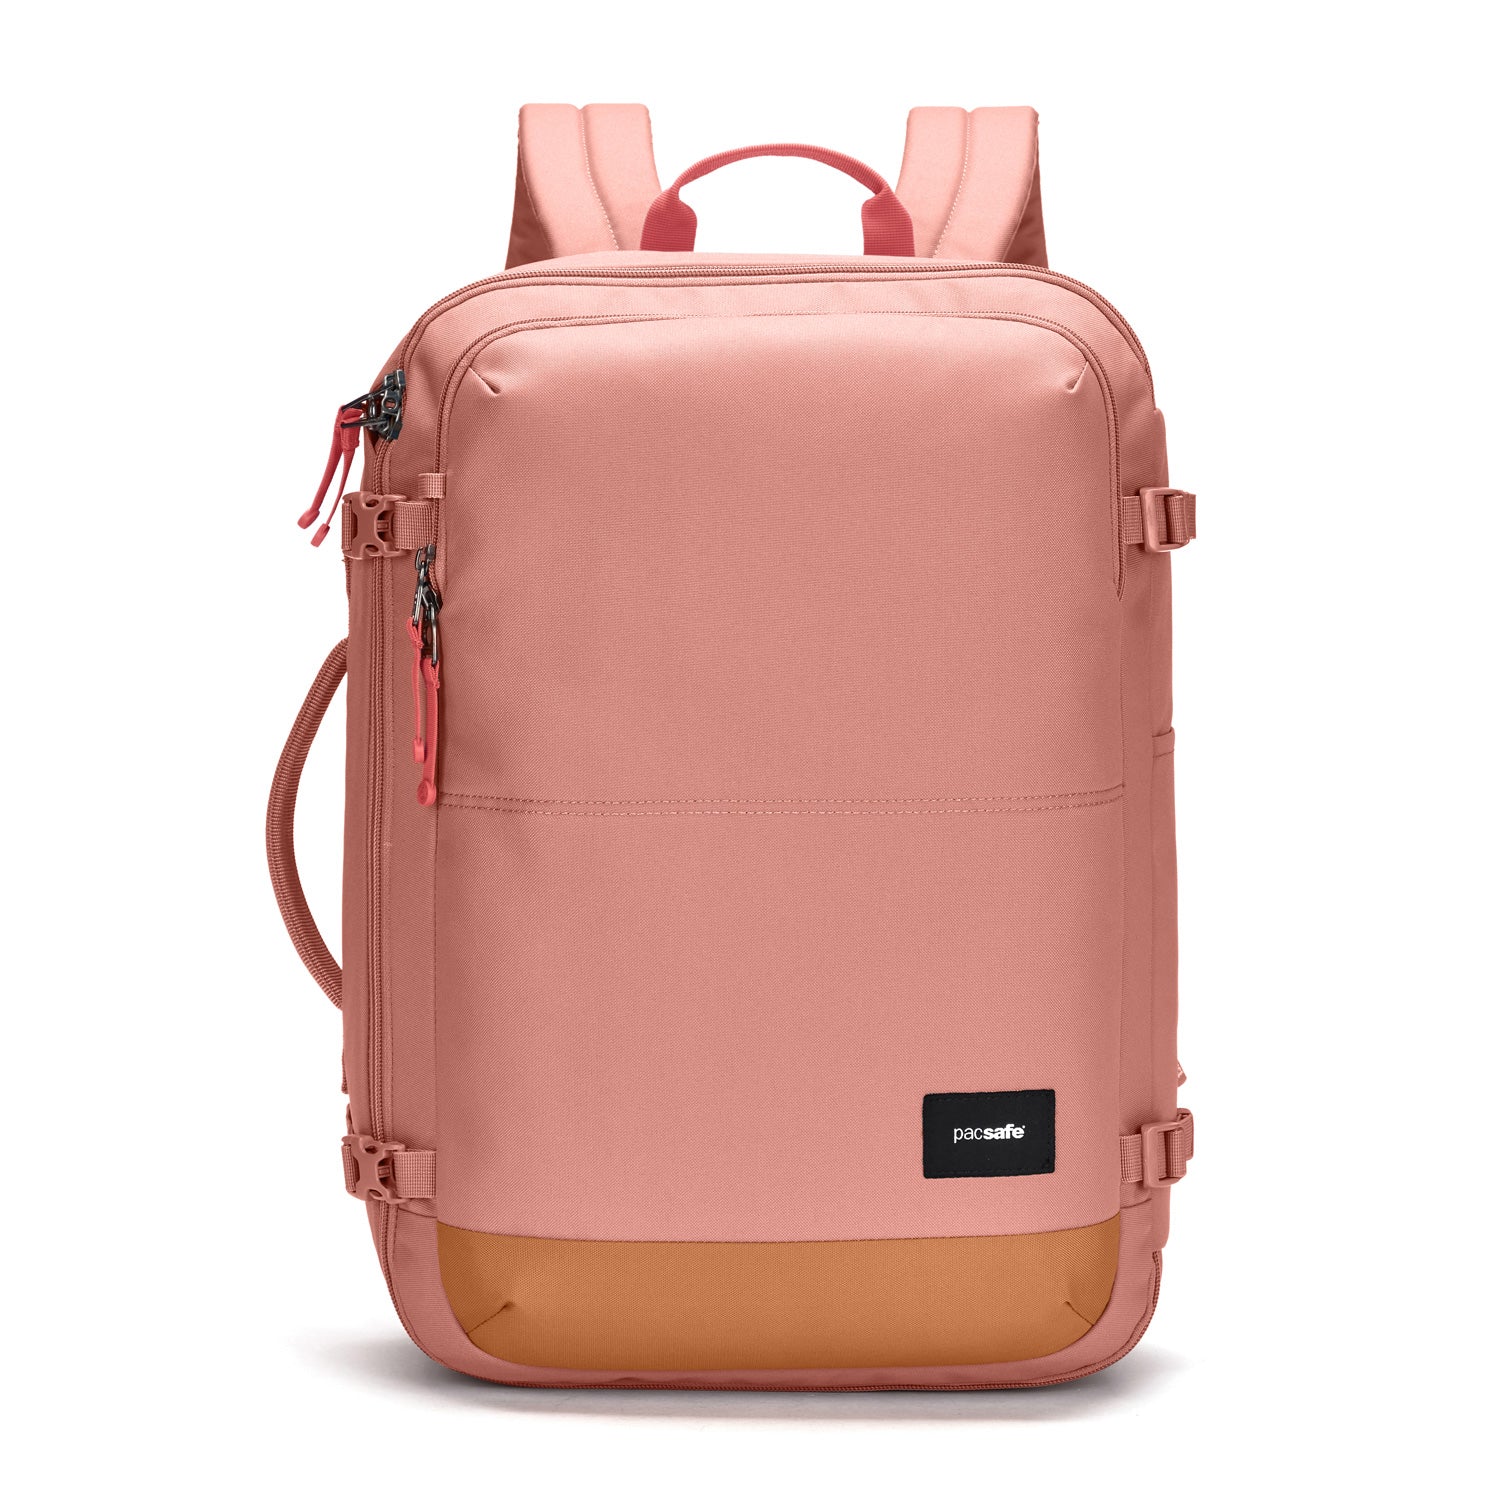 Pacsafe - Pacsafe GO Carry-on Backpack 34L - Rose-1